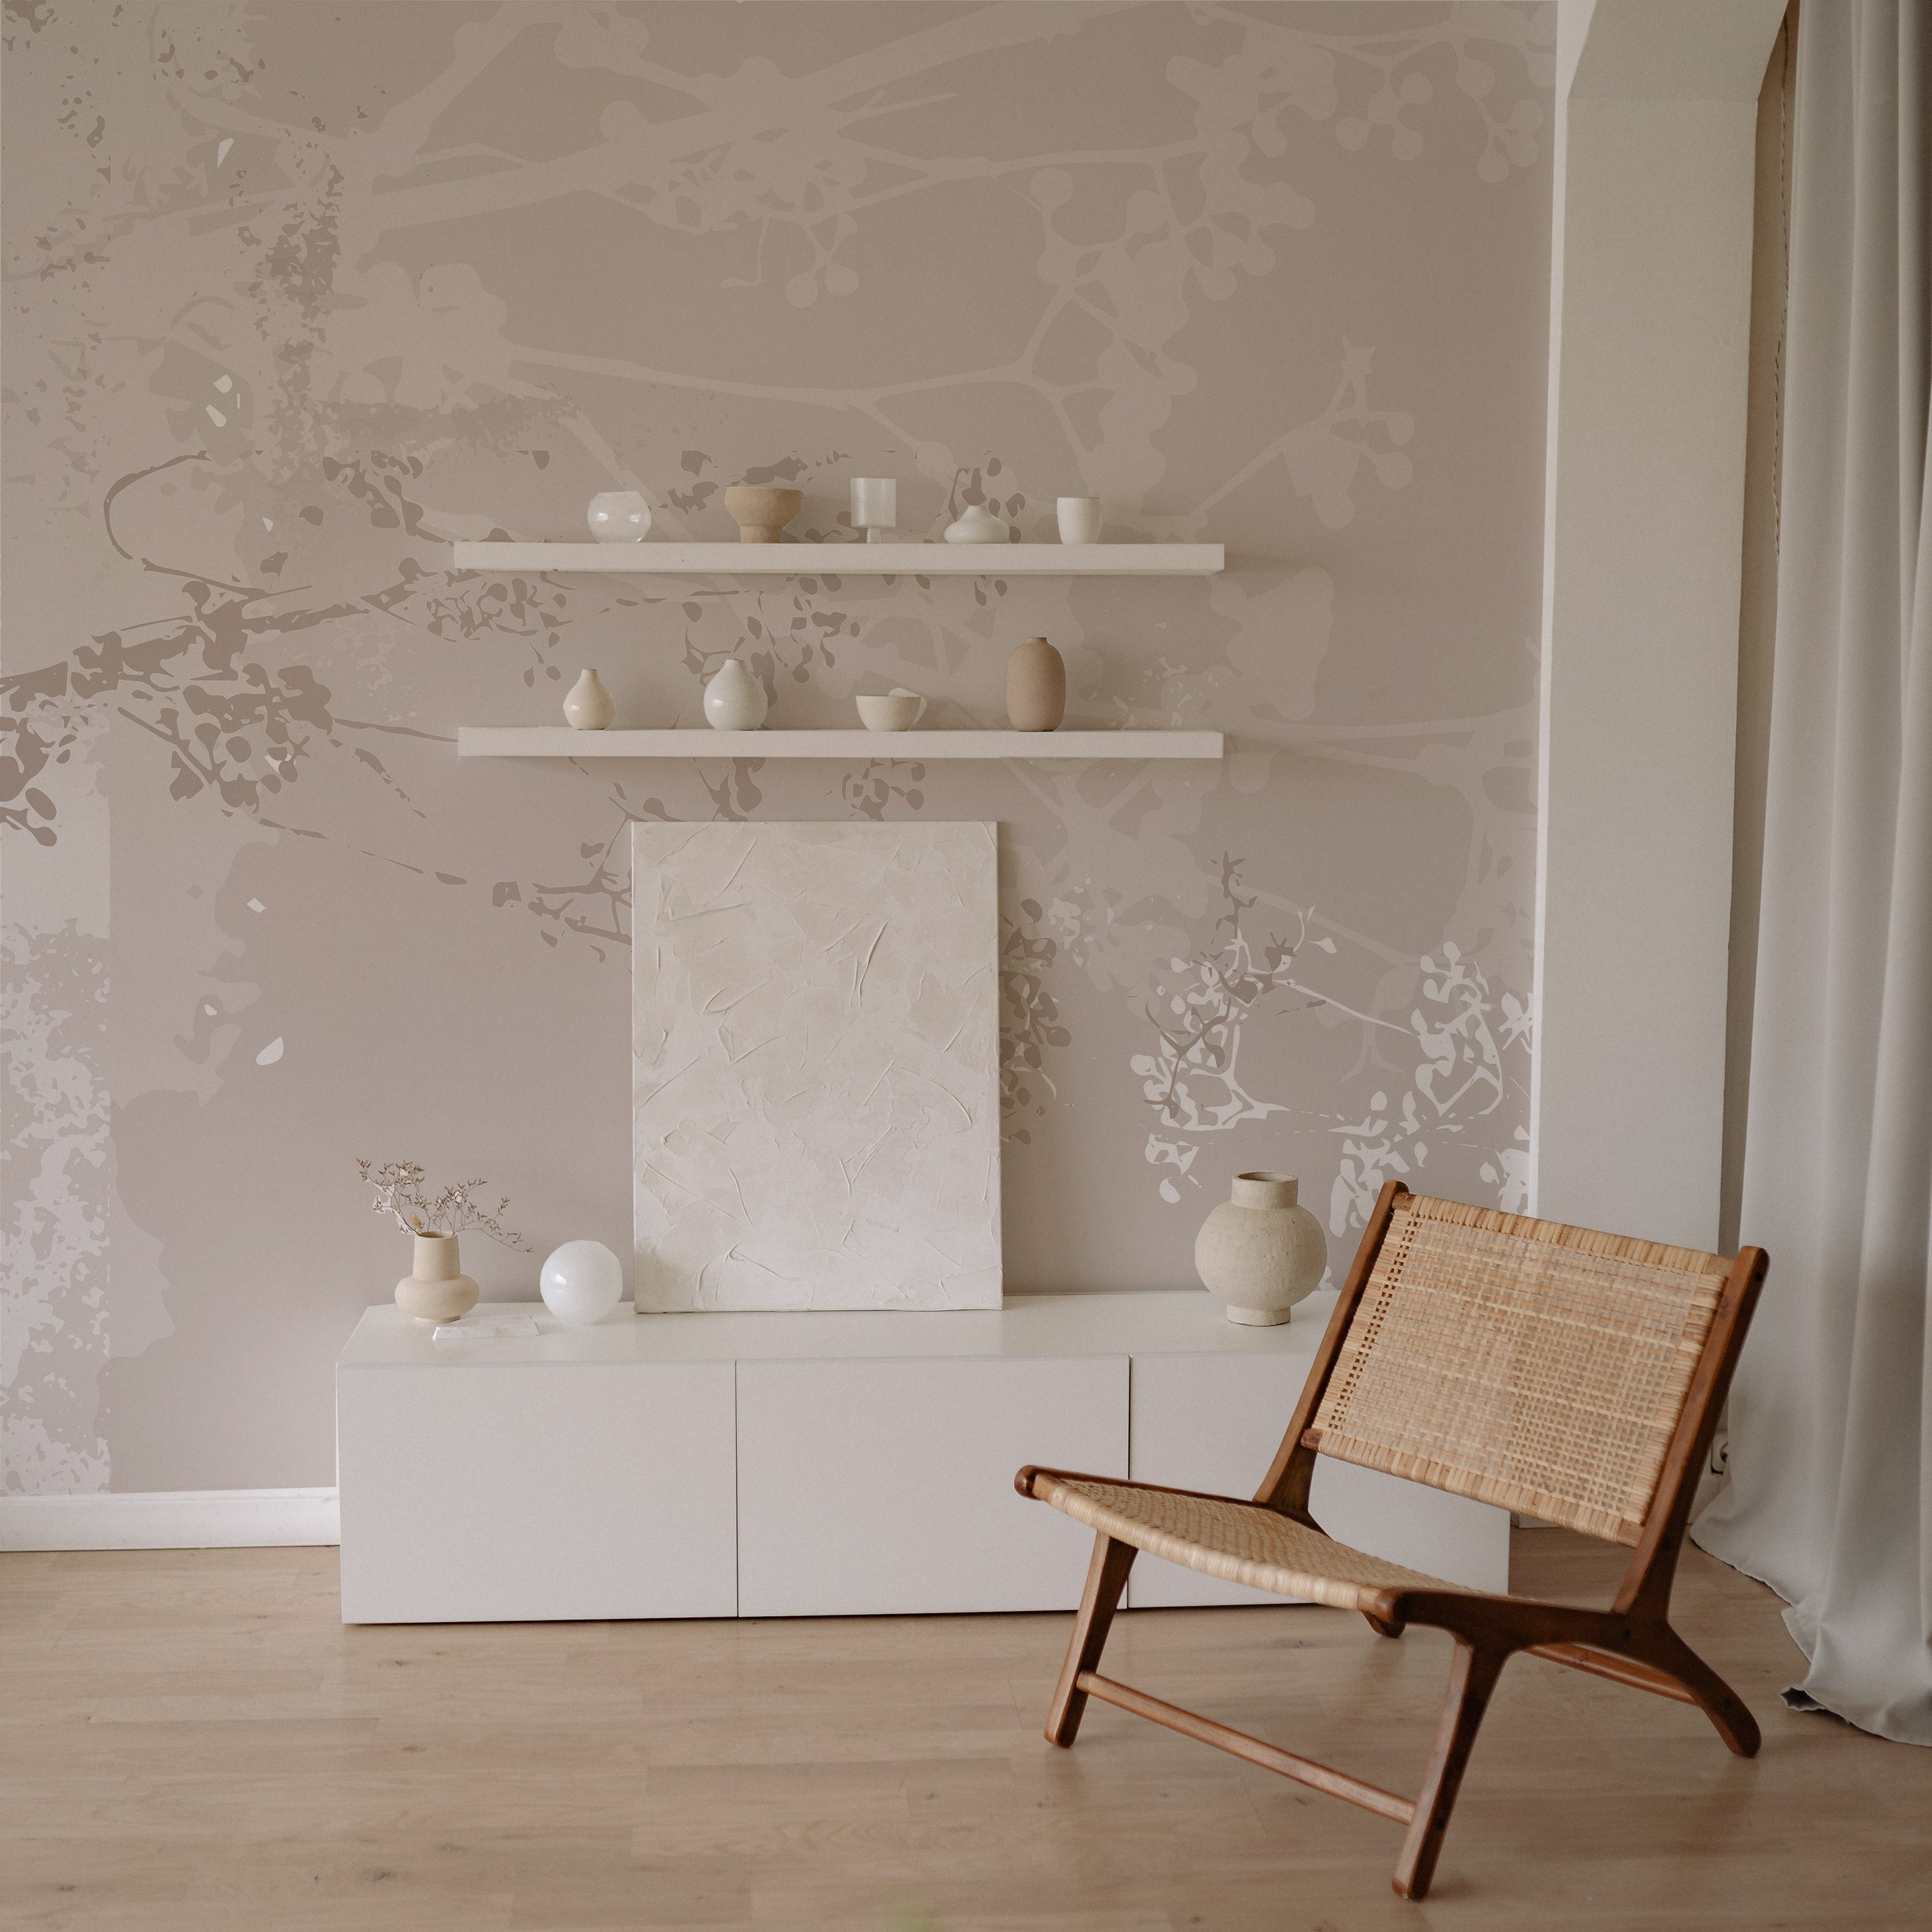 Modern Floral Mural Wallpaper with delicate floral branches in shades of beige, enhancing a living room with minimalist decor, including shelves and ceramic vases.